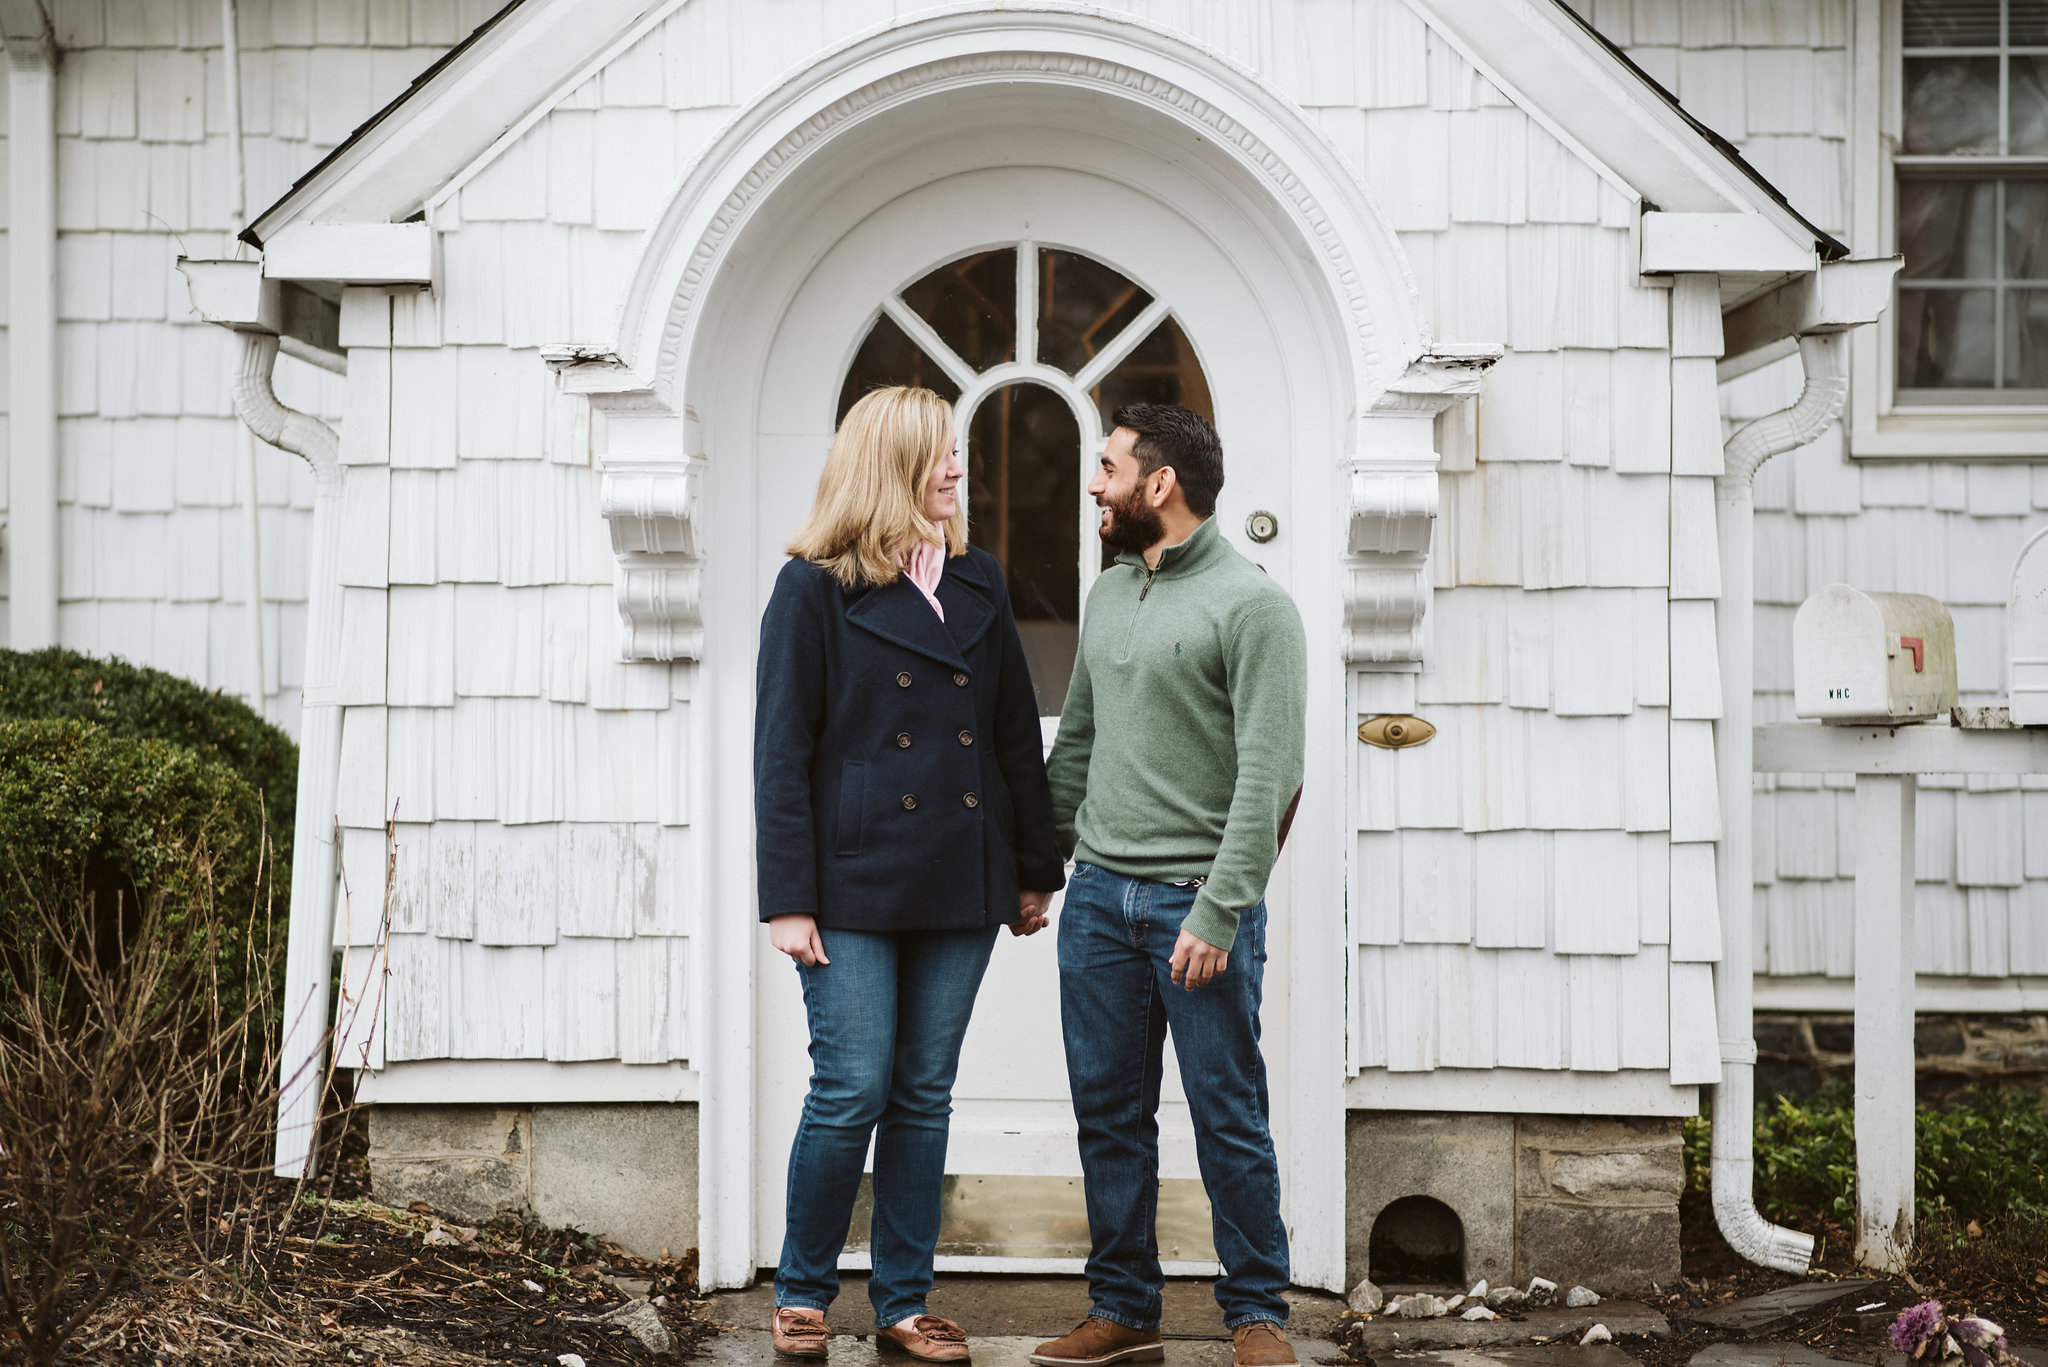 Engagement Photos, Rainy, Ellicott City, Maryland Wedding Photographer, Winter, Overhills Mansion, Indian American, Historical, Classic, Traditional, Outdoor, Laughing